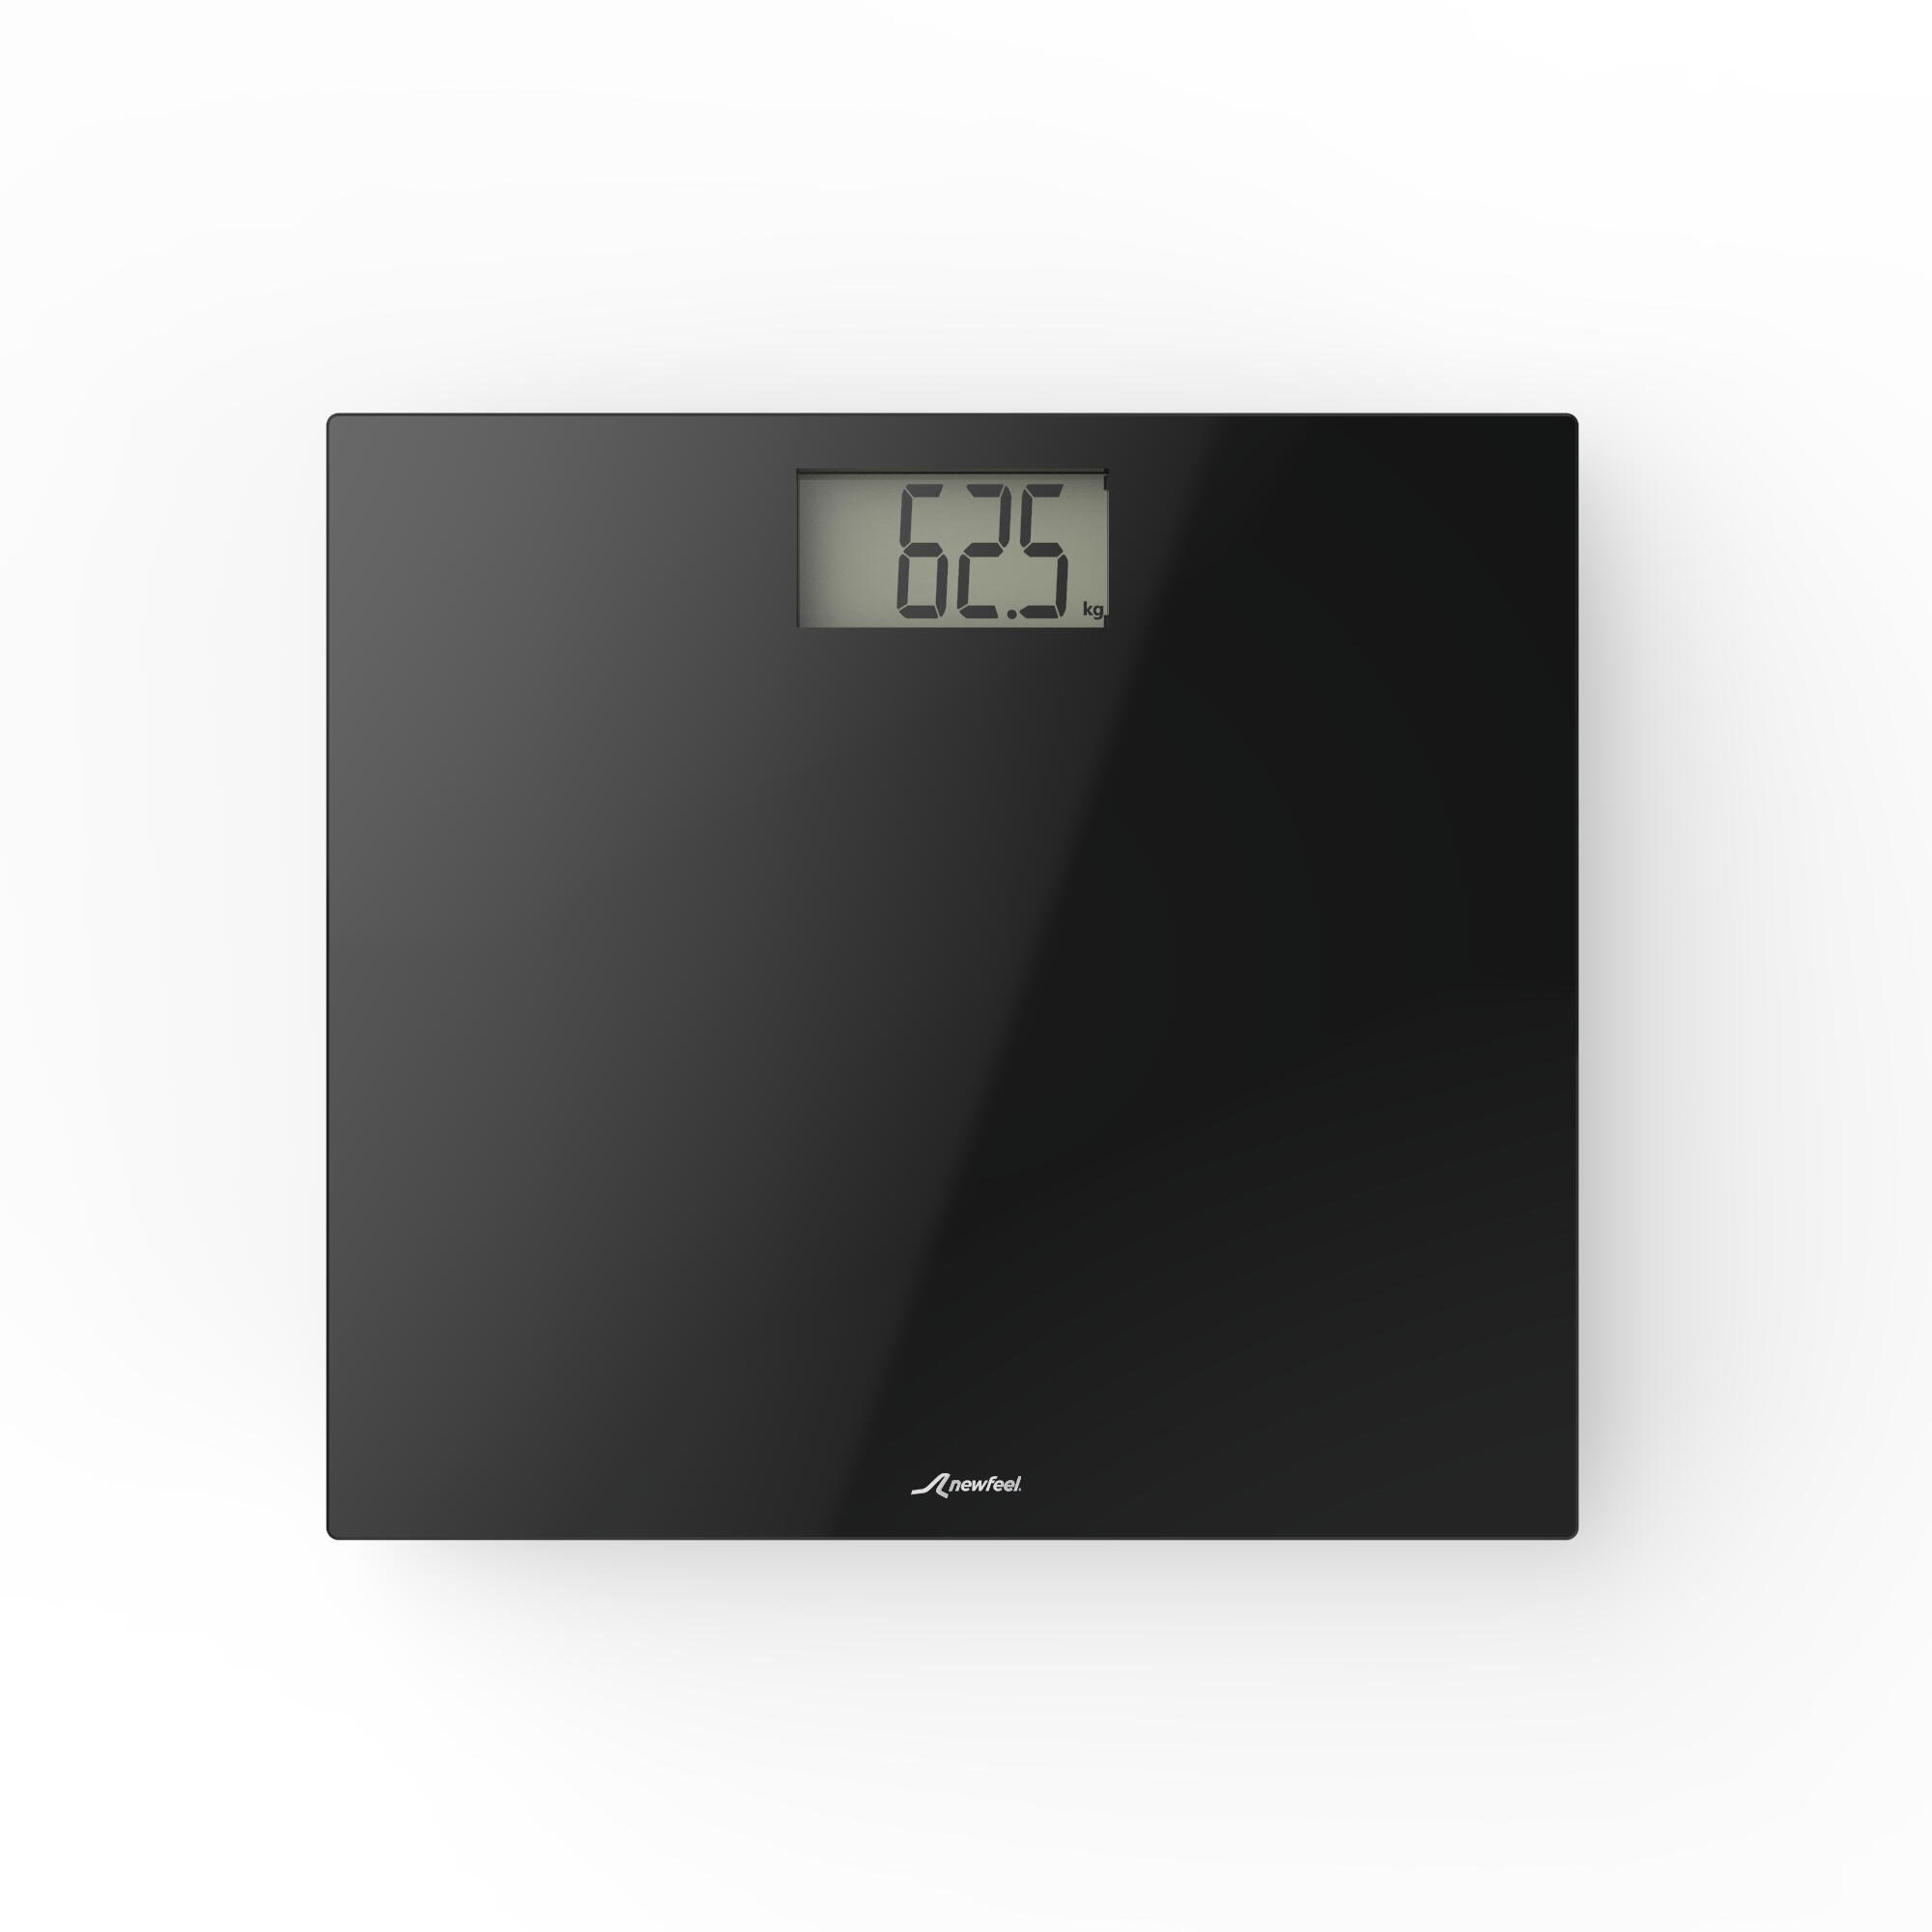 Bathroom and Weight Scales